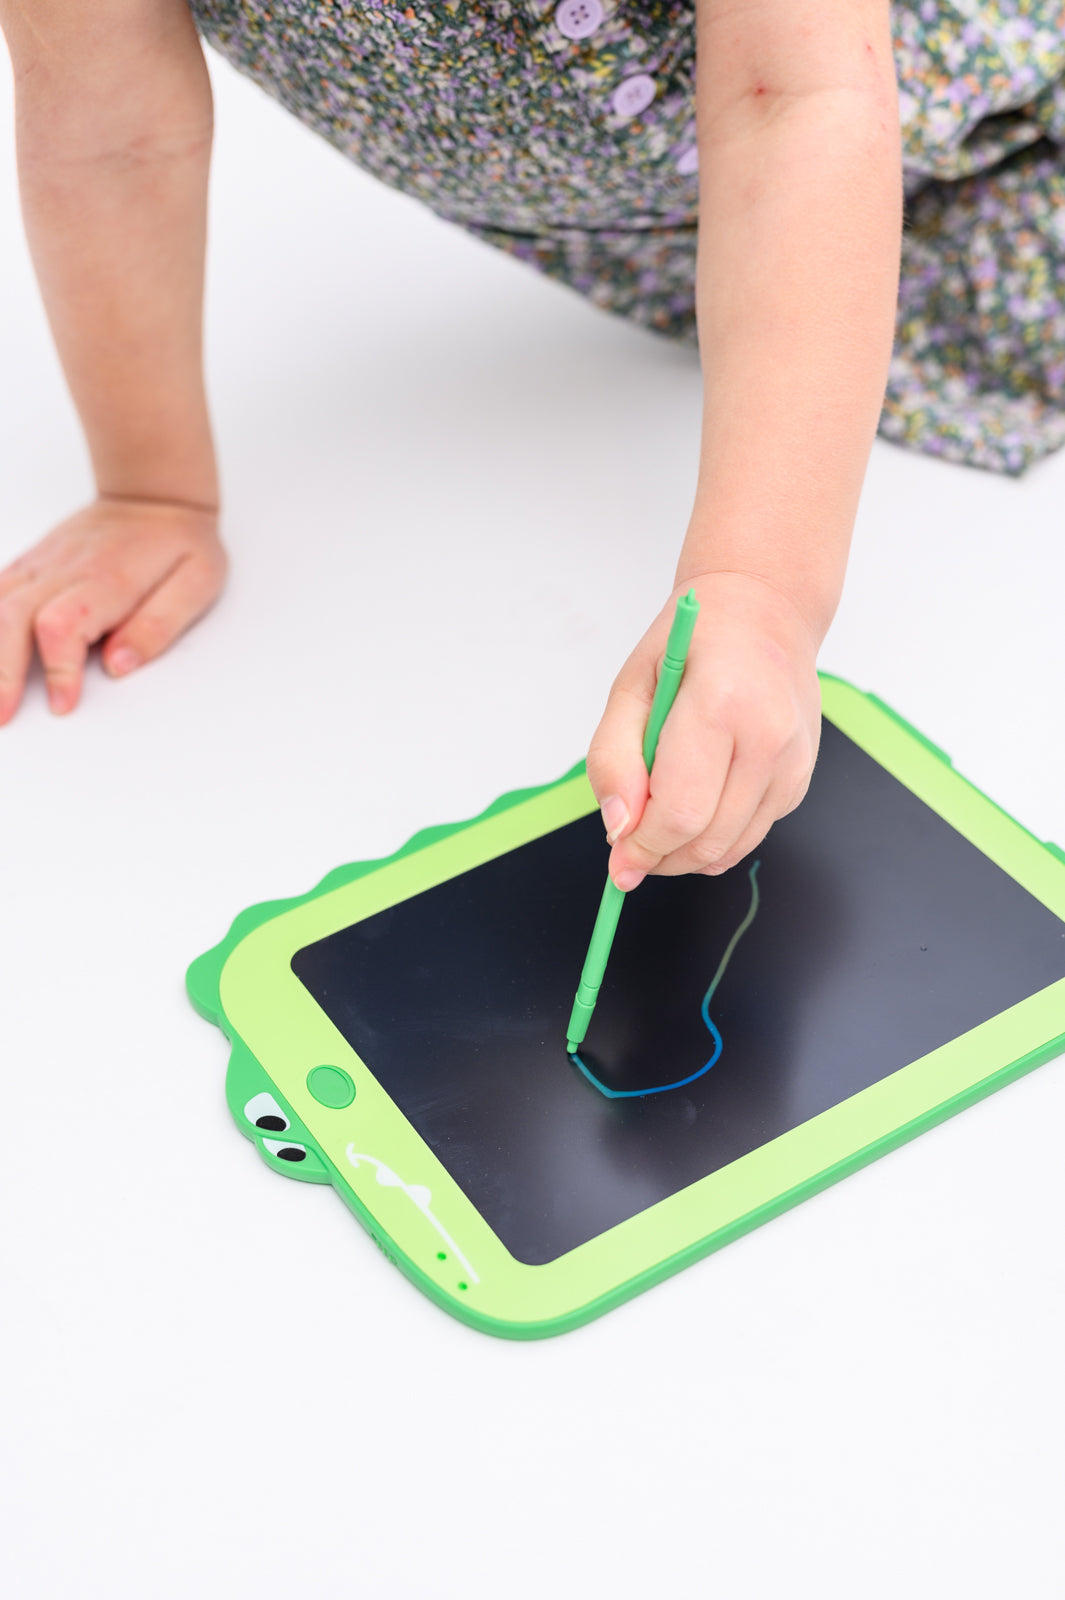 Sketch It Up LCD Drawing Board in Green (Online Exclusive)